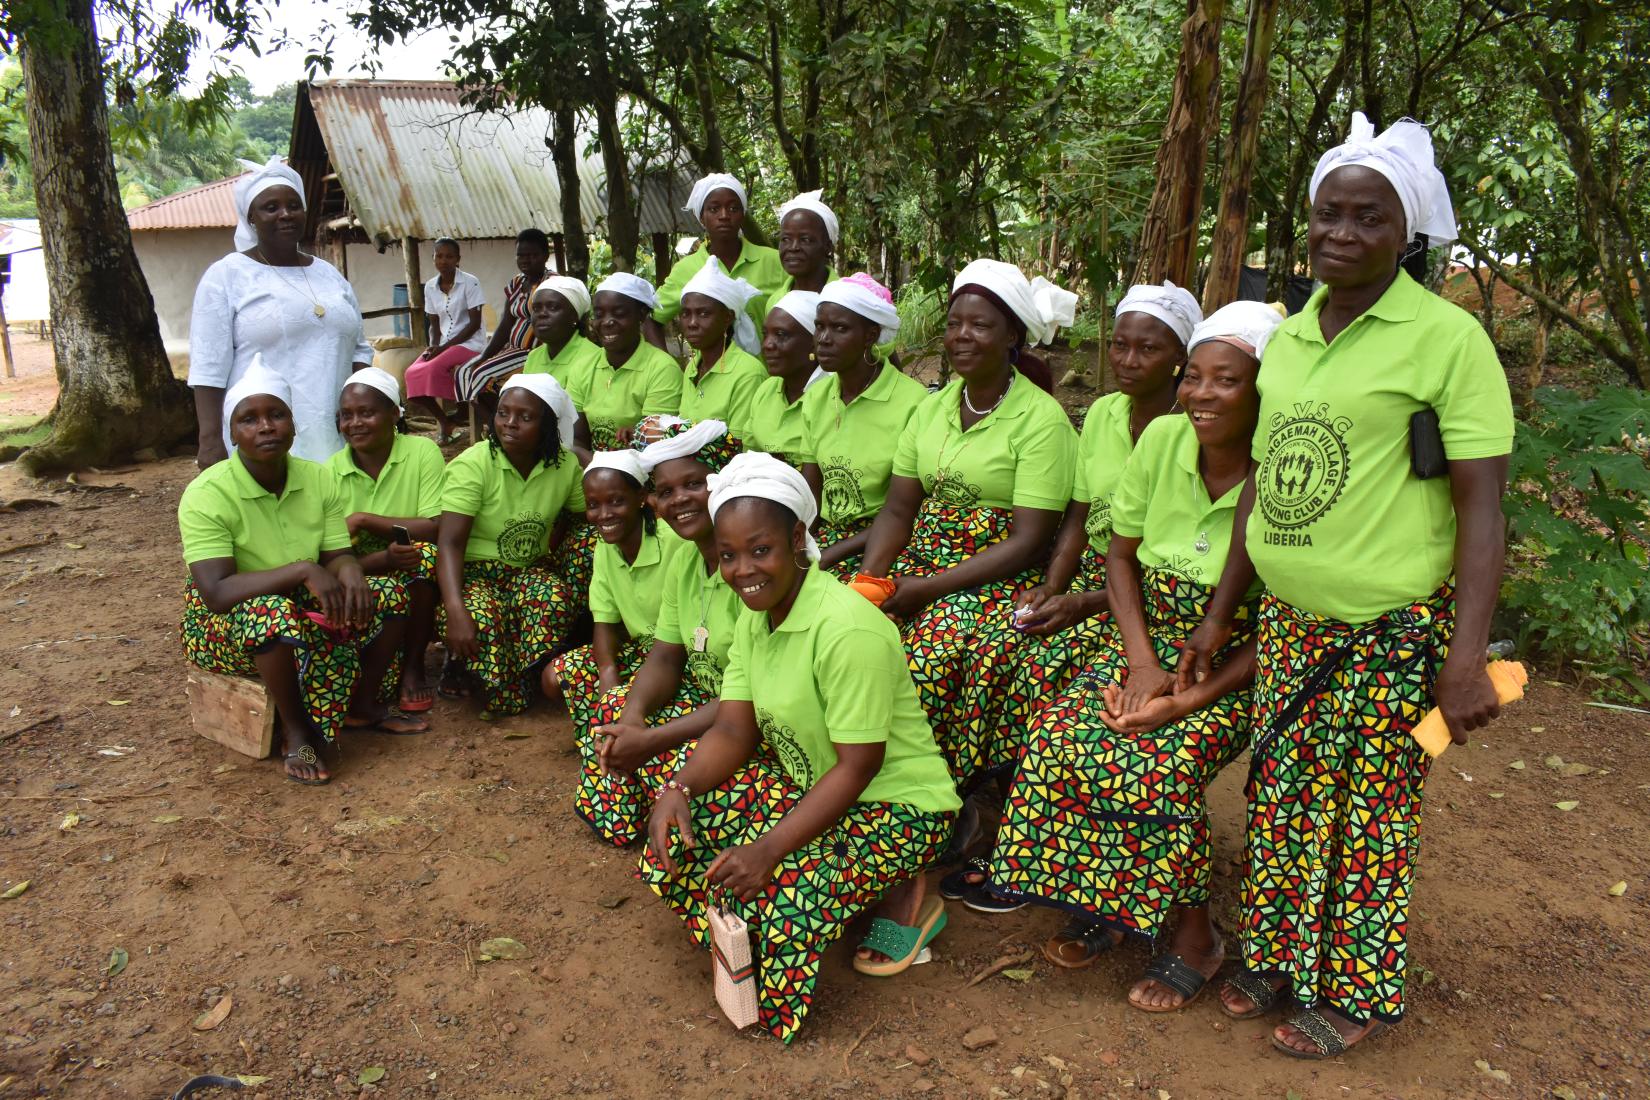 Traditional FGM practitioners from the town of Sonkay pose while standing for a photo